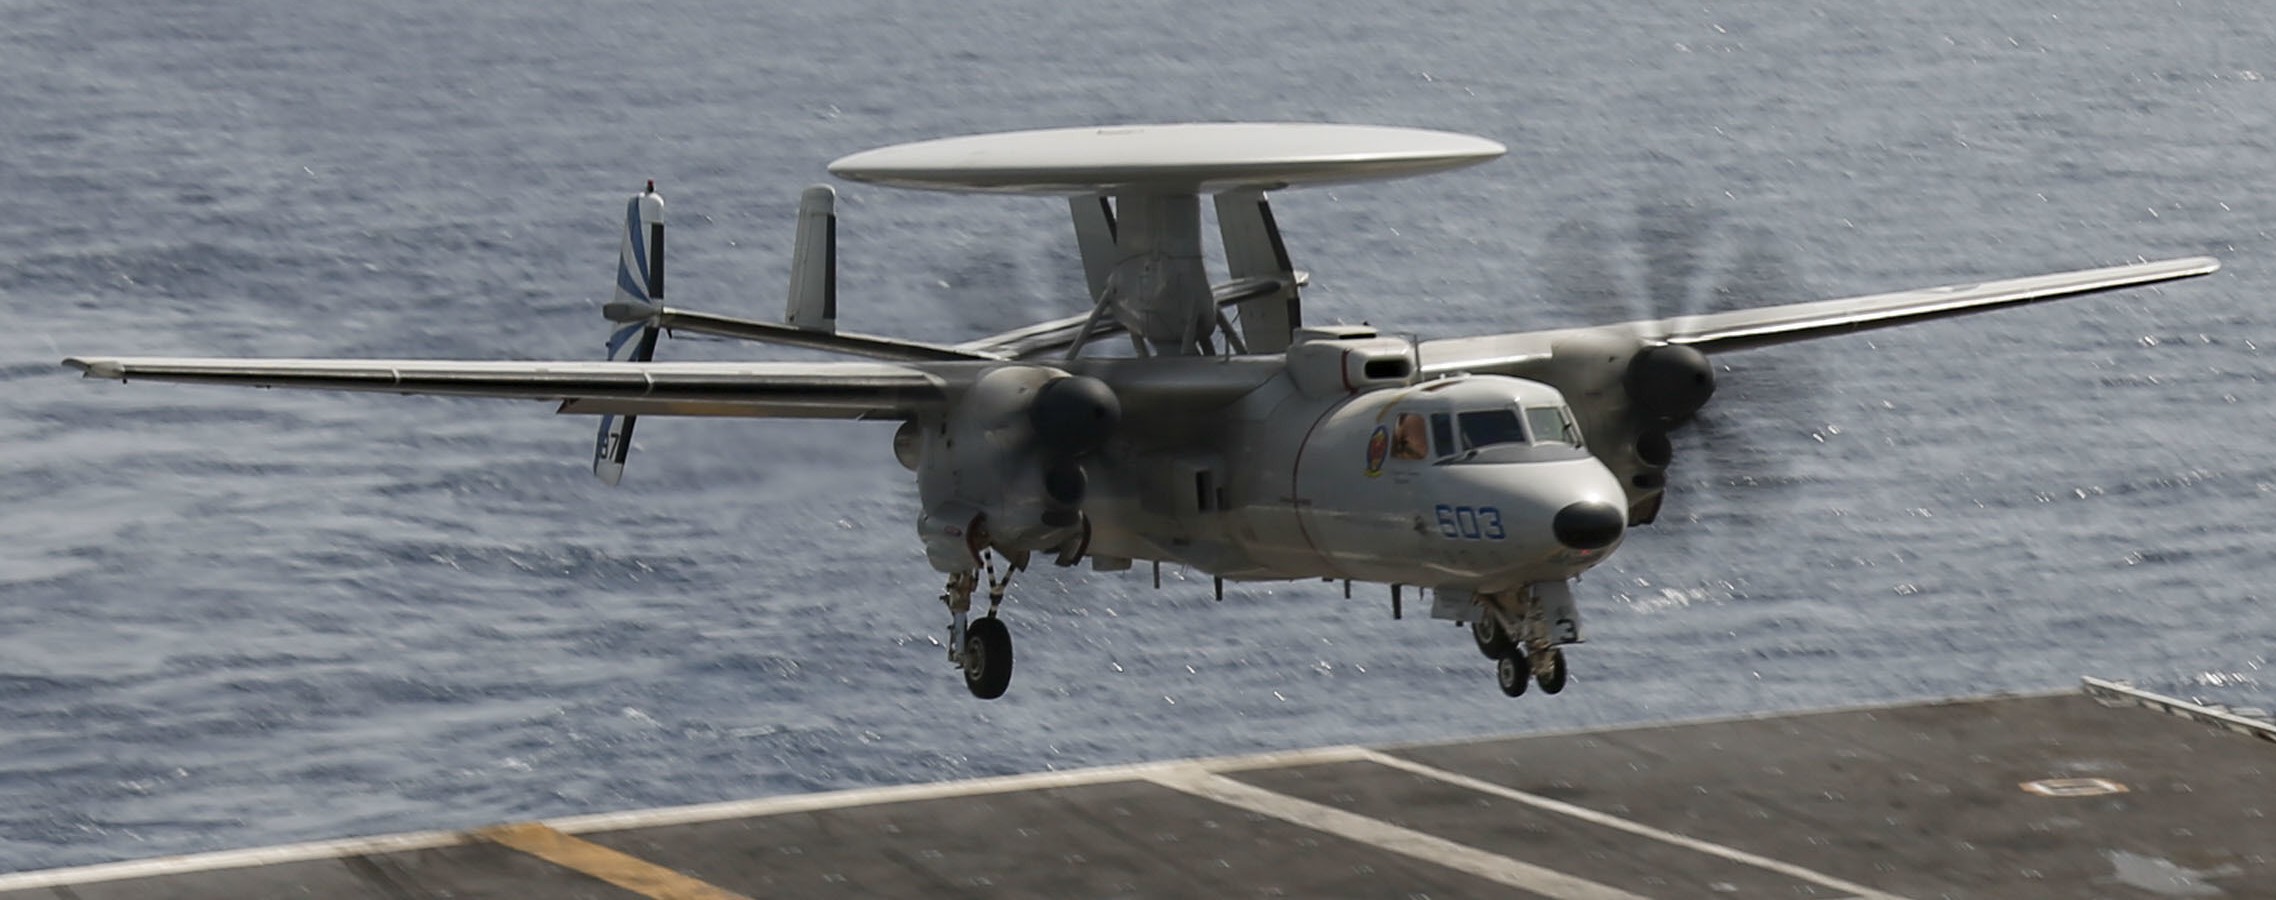 vaw-121 bluetails airborne command and control squadron us navy e-2d advanced hawkeye cvw-7 uss abraham lincoln cvn-72 72